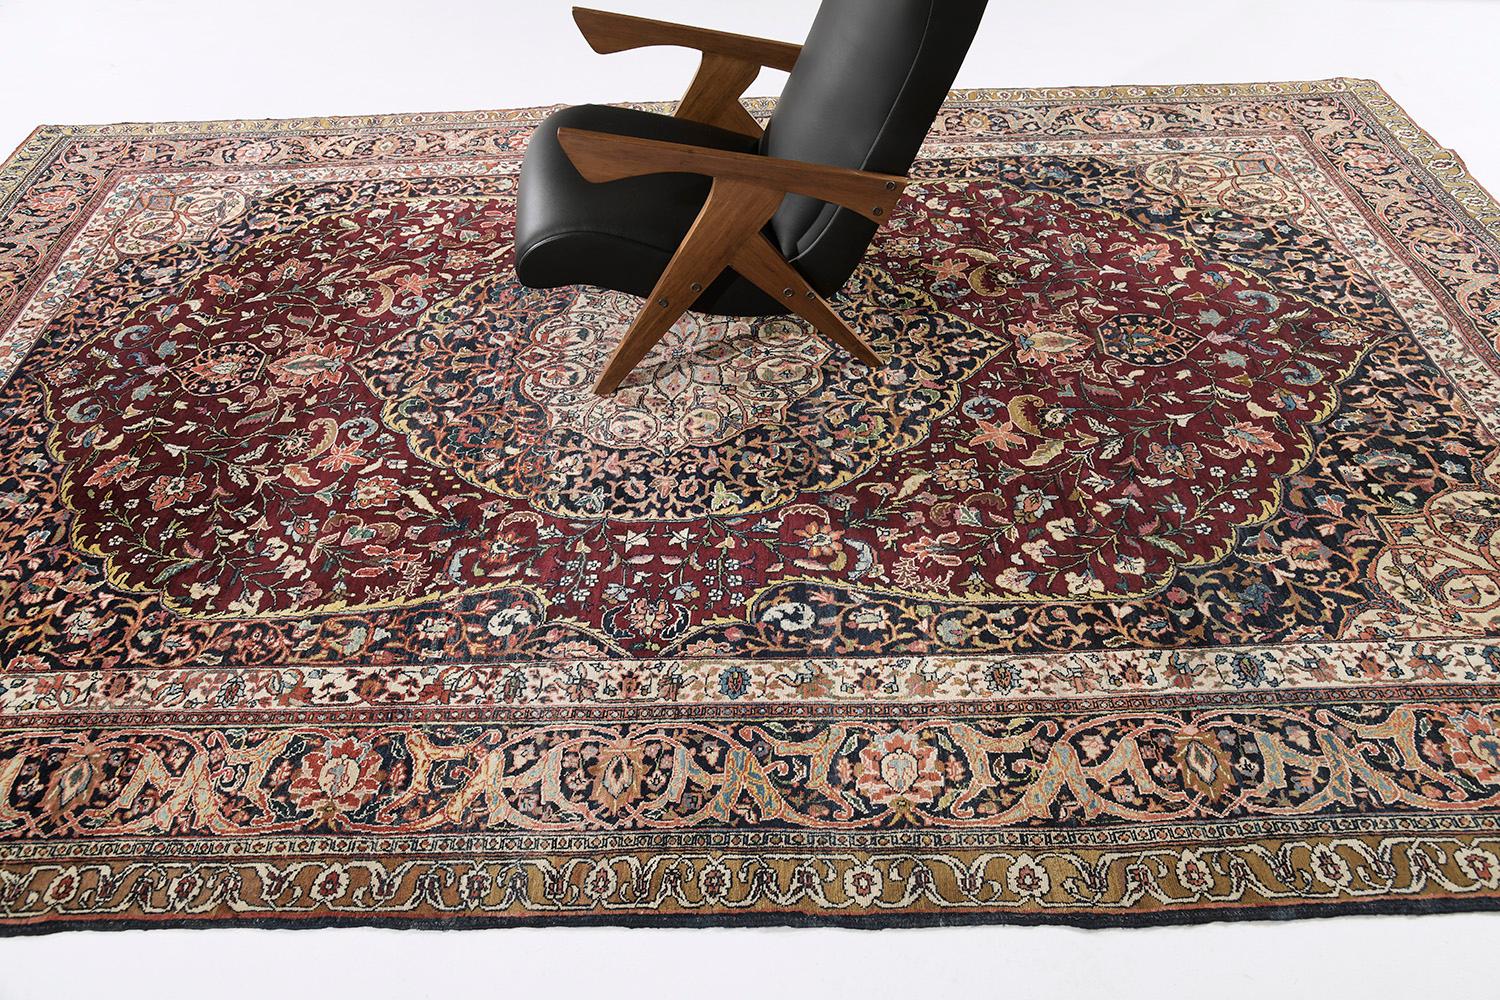 A grandiose Antique Persian Tabriz rug with infinite forms that complement with each other in a brilliant dance of contrast and synchronization. Featuring the impressive colour scheme that will captivate your attention, this timeless rug comprises